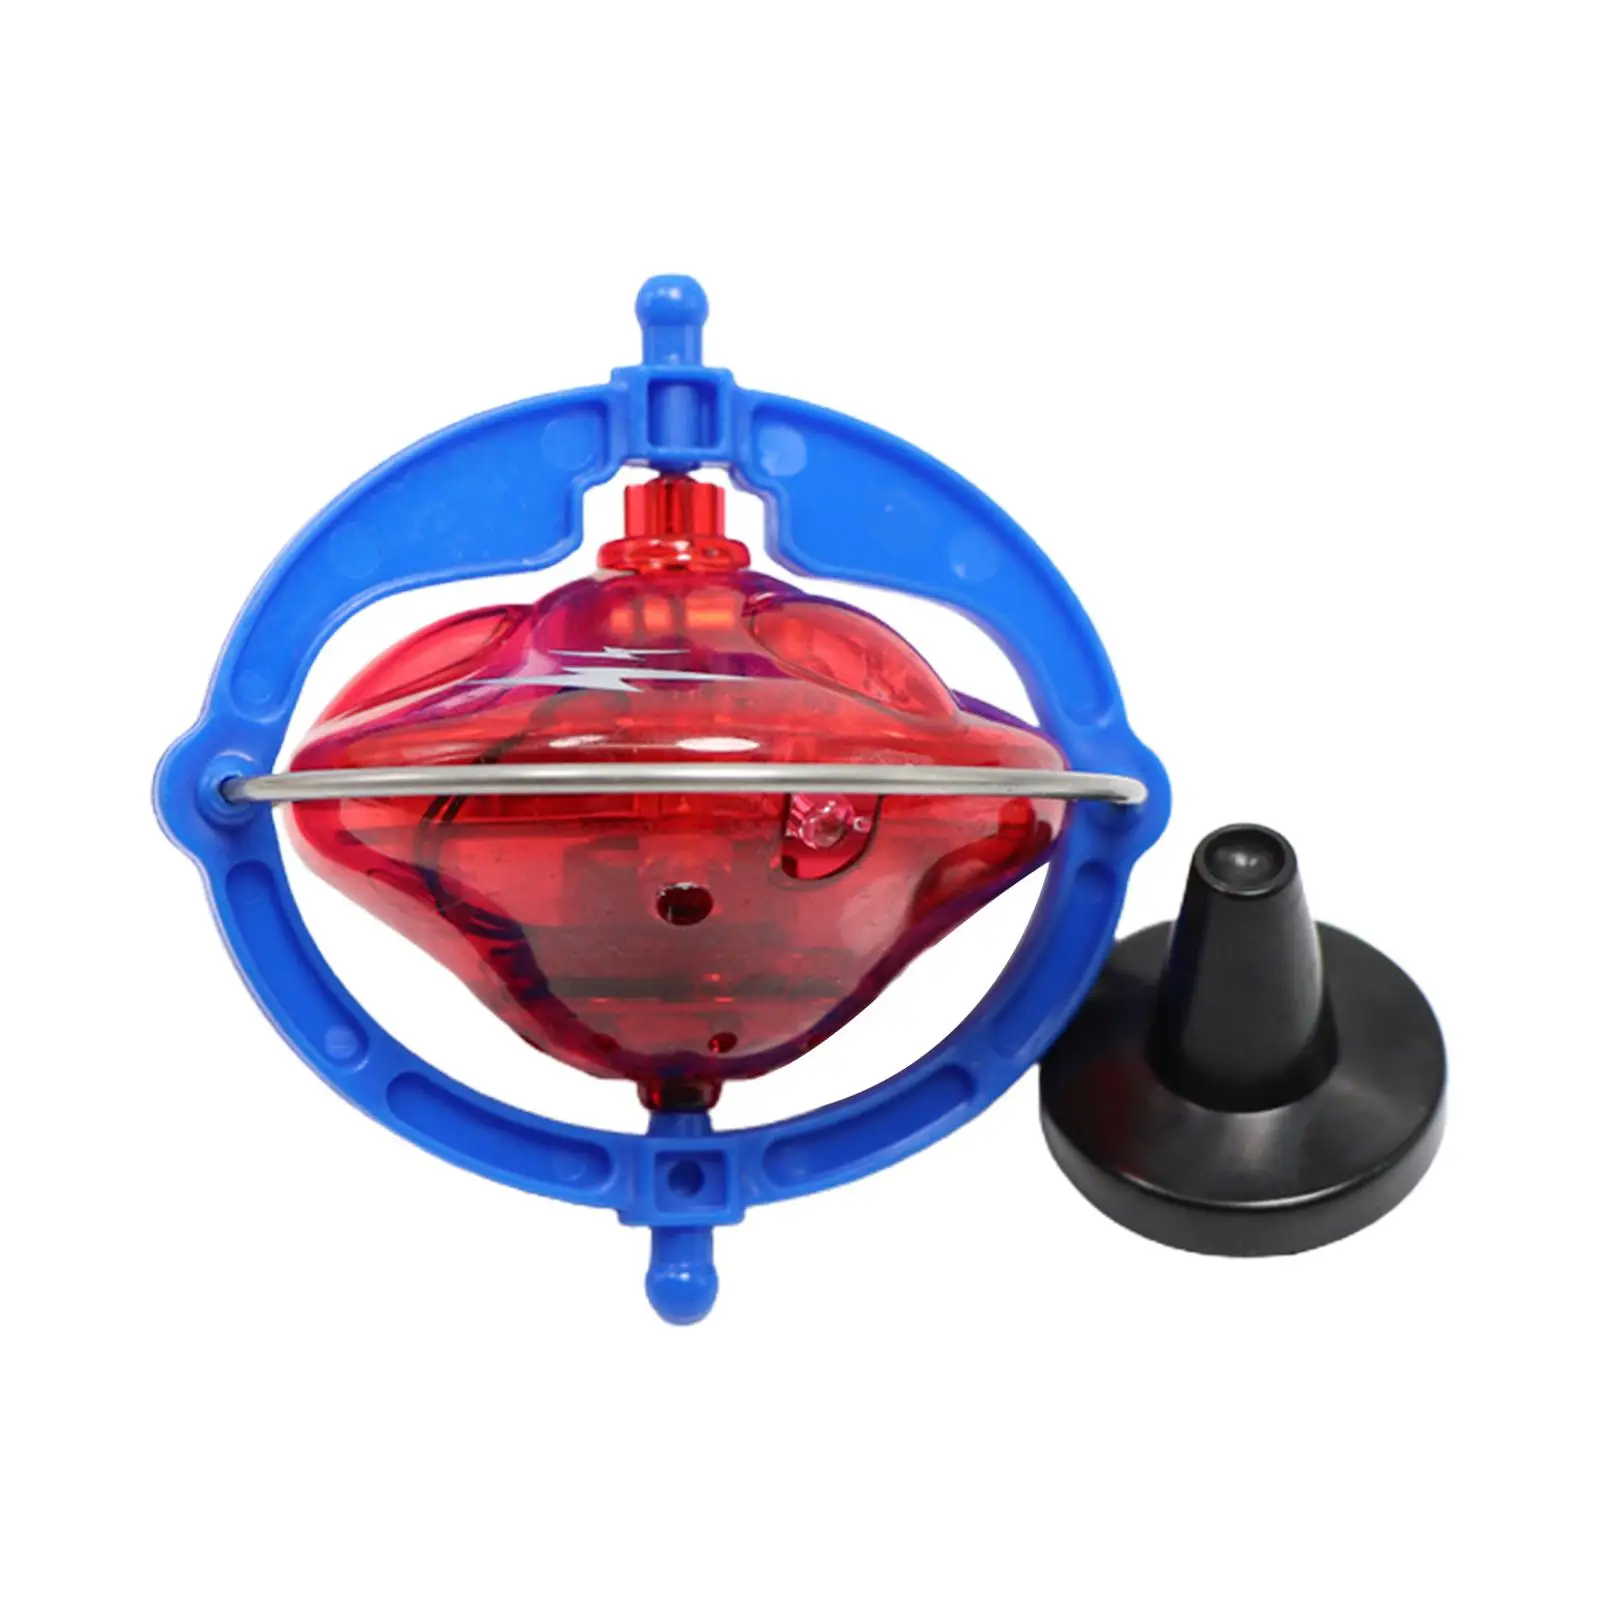 Music Gyro Gyroscope Kids Toys Rotating Top Novelty Flashing Rotating Lights Toy for Party Favors Birthday